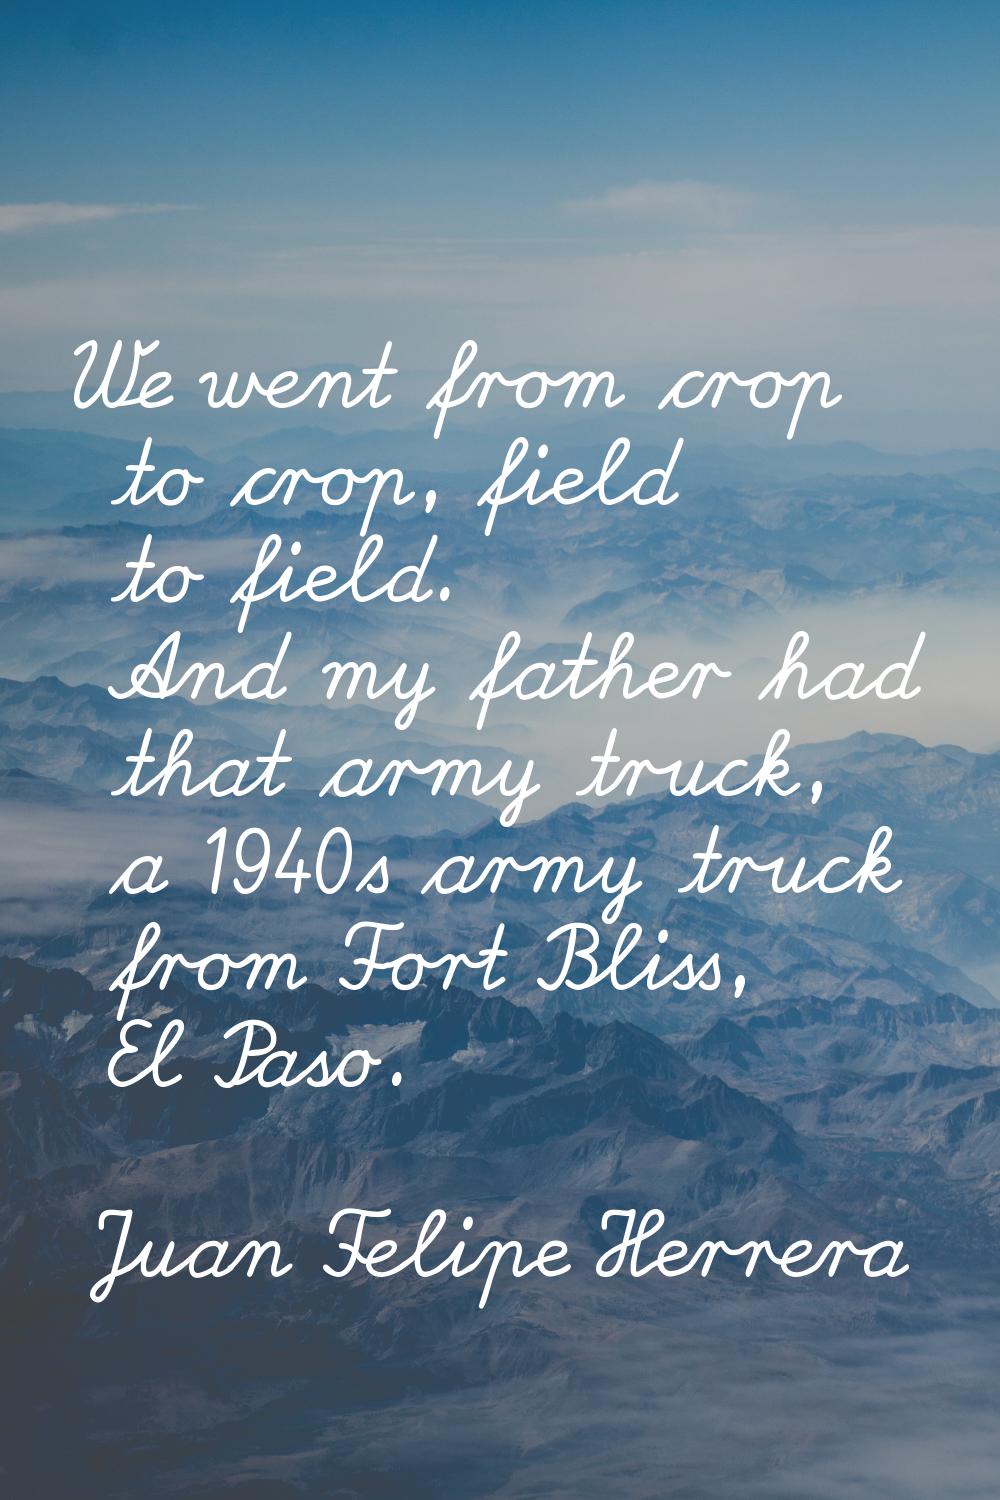 We went from crop to crop, field to field. And my father had that army truck, a 1940s army truck fr